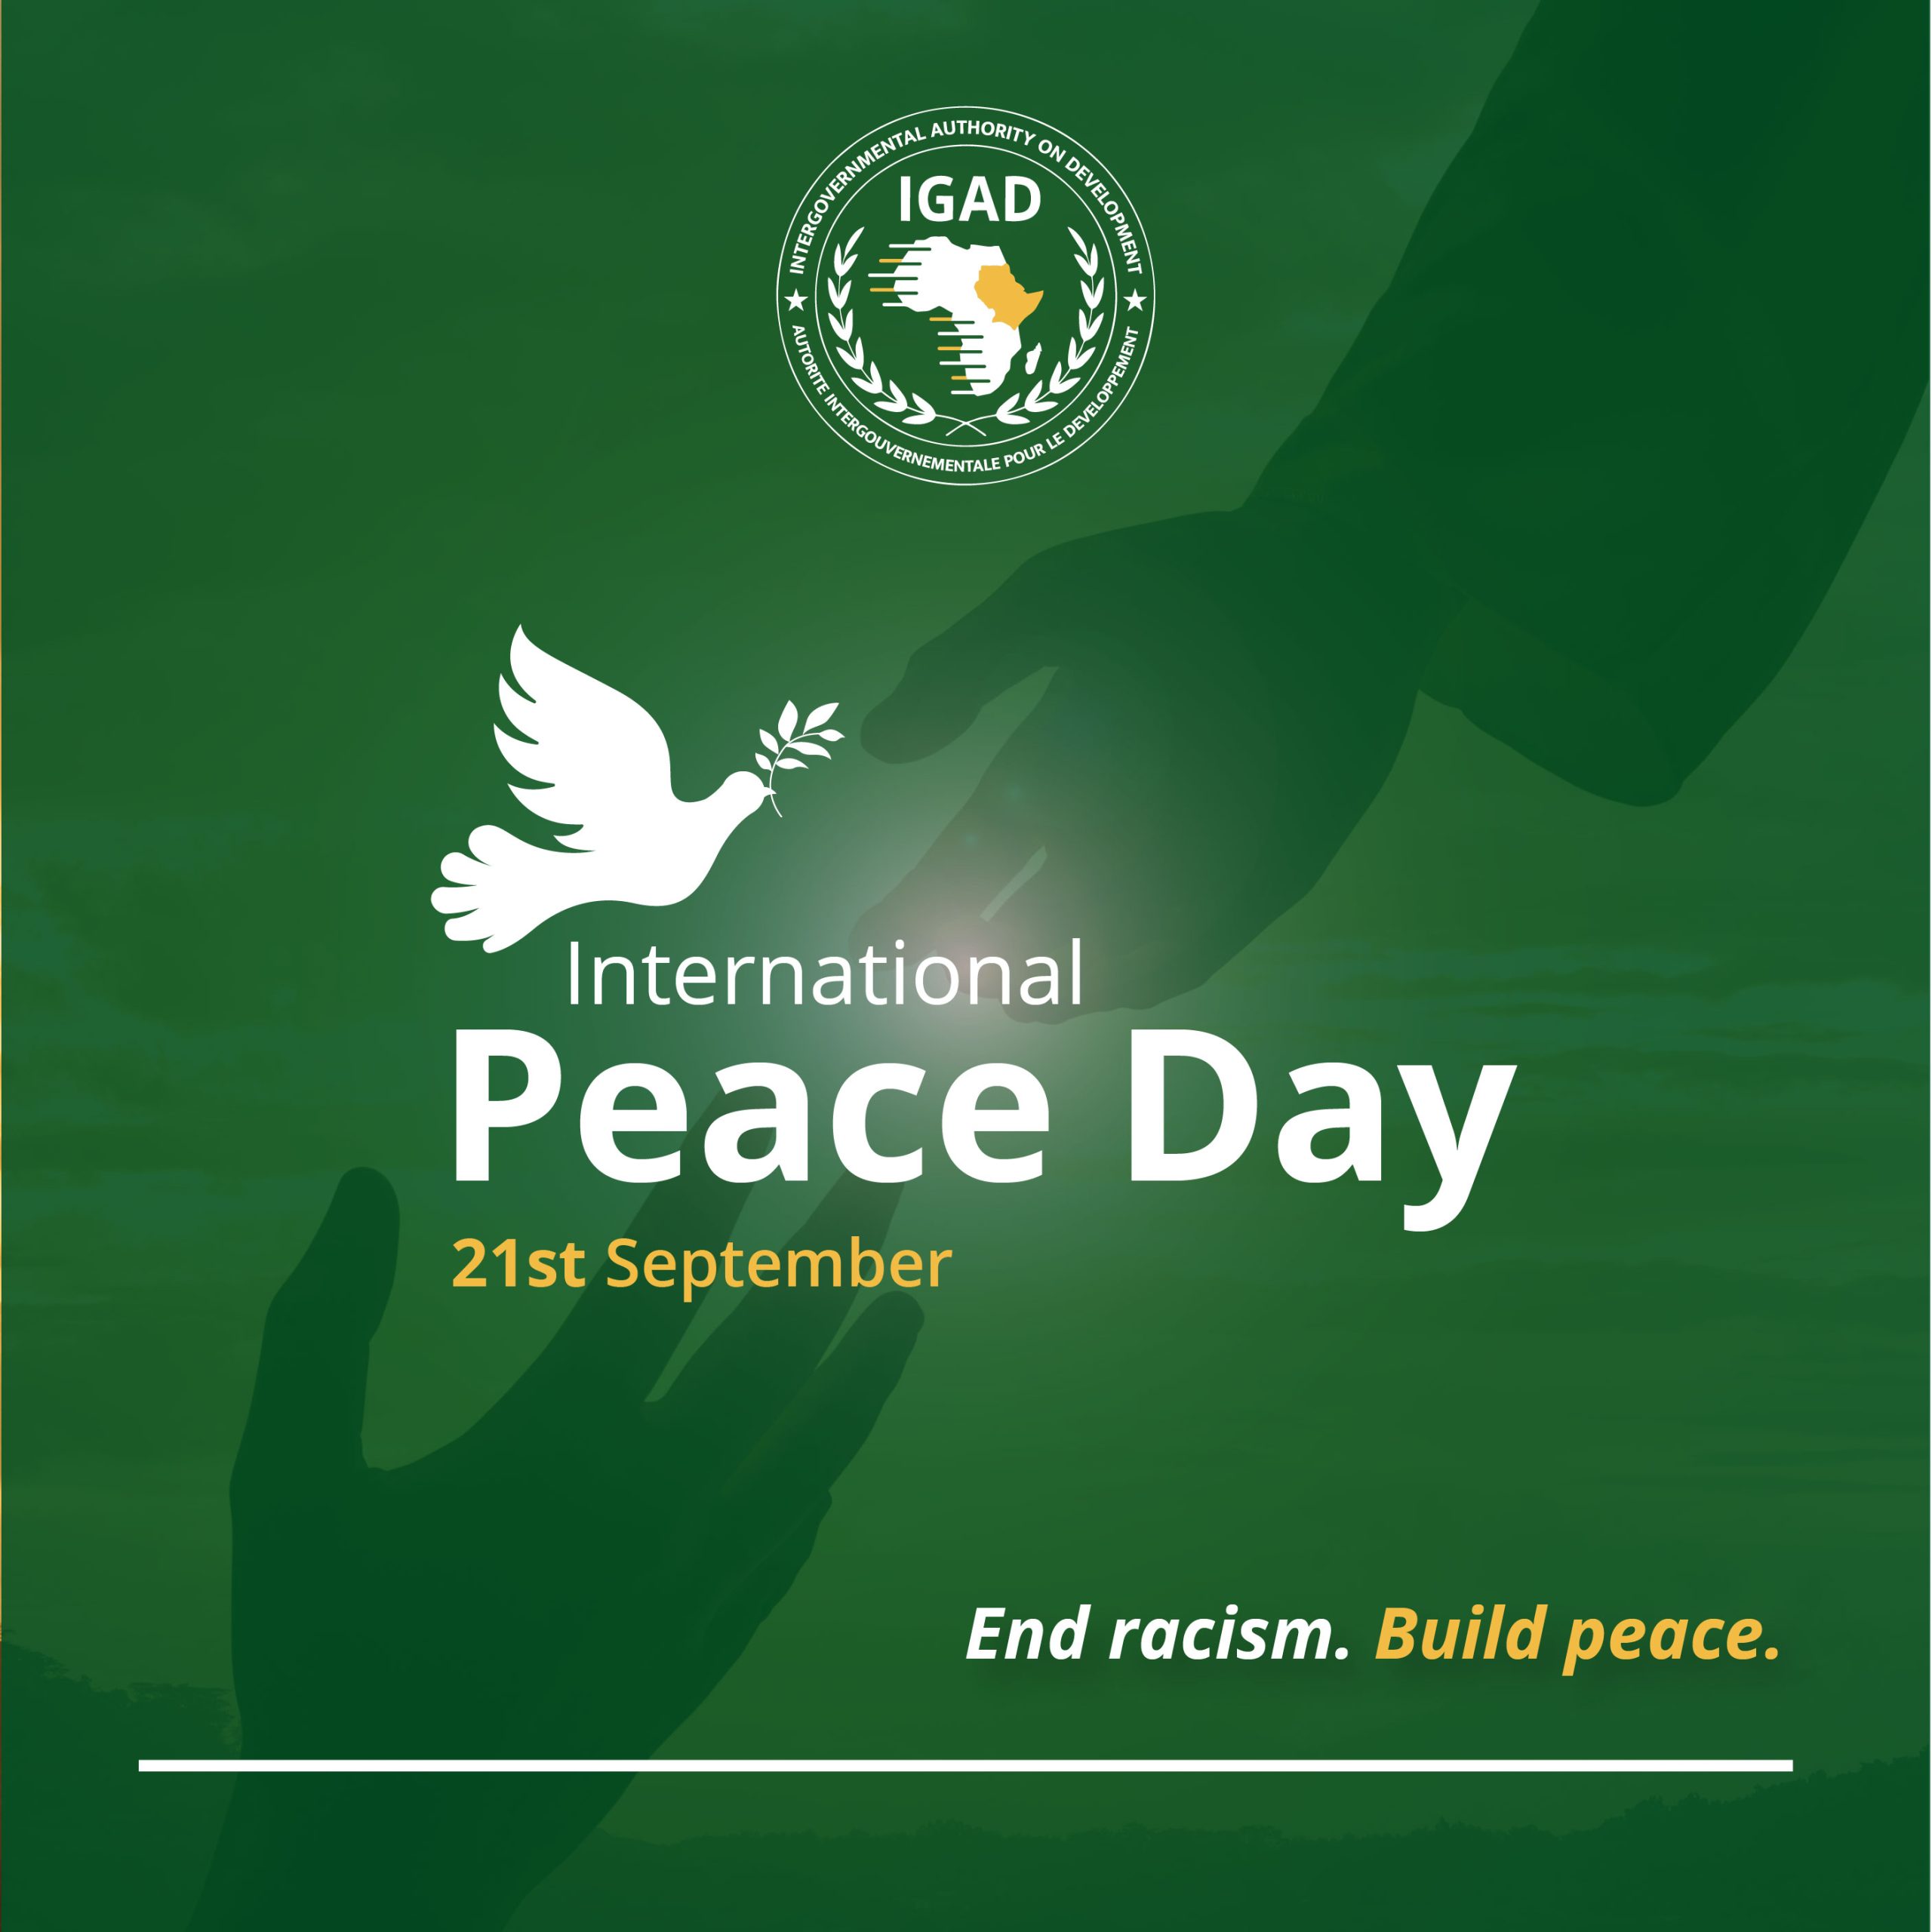 IGAD joins the rest of the world in celebrating International Day of Peace